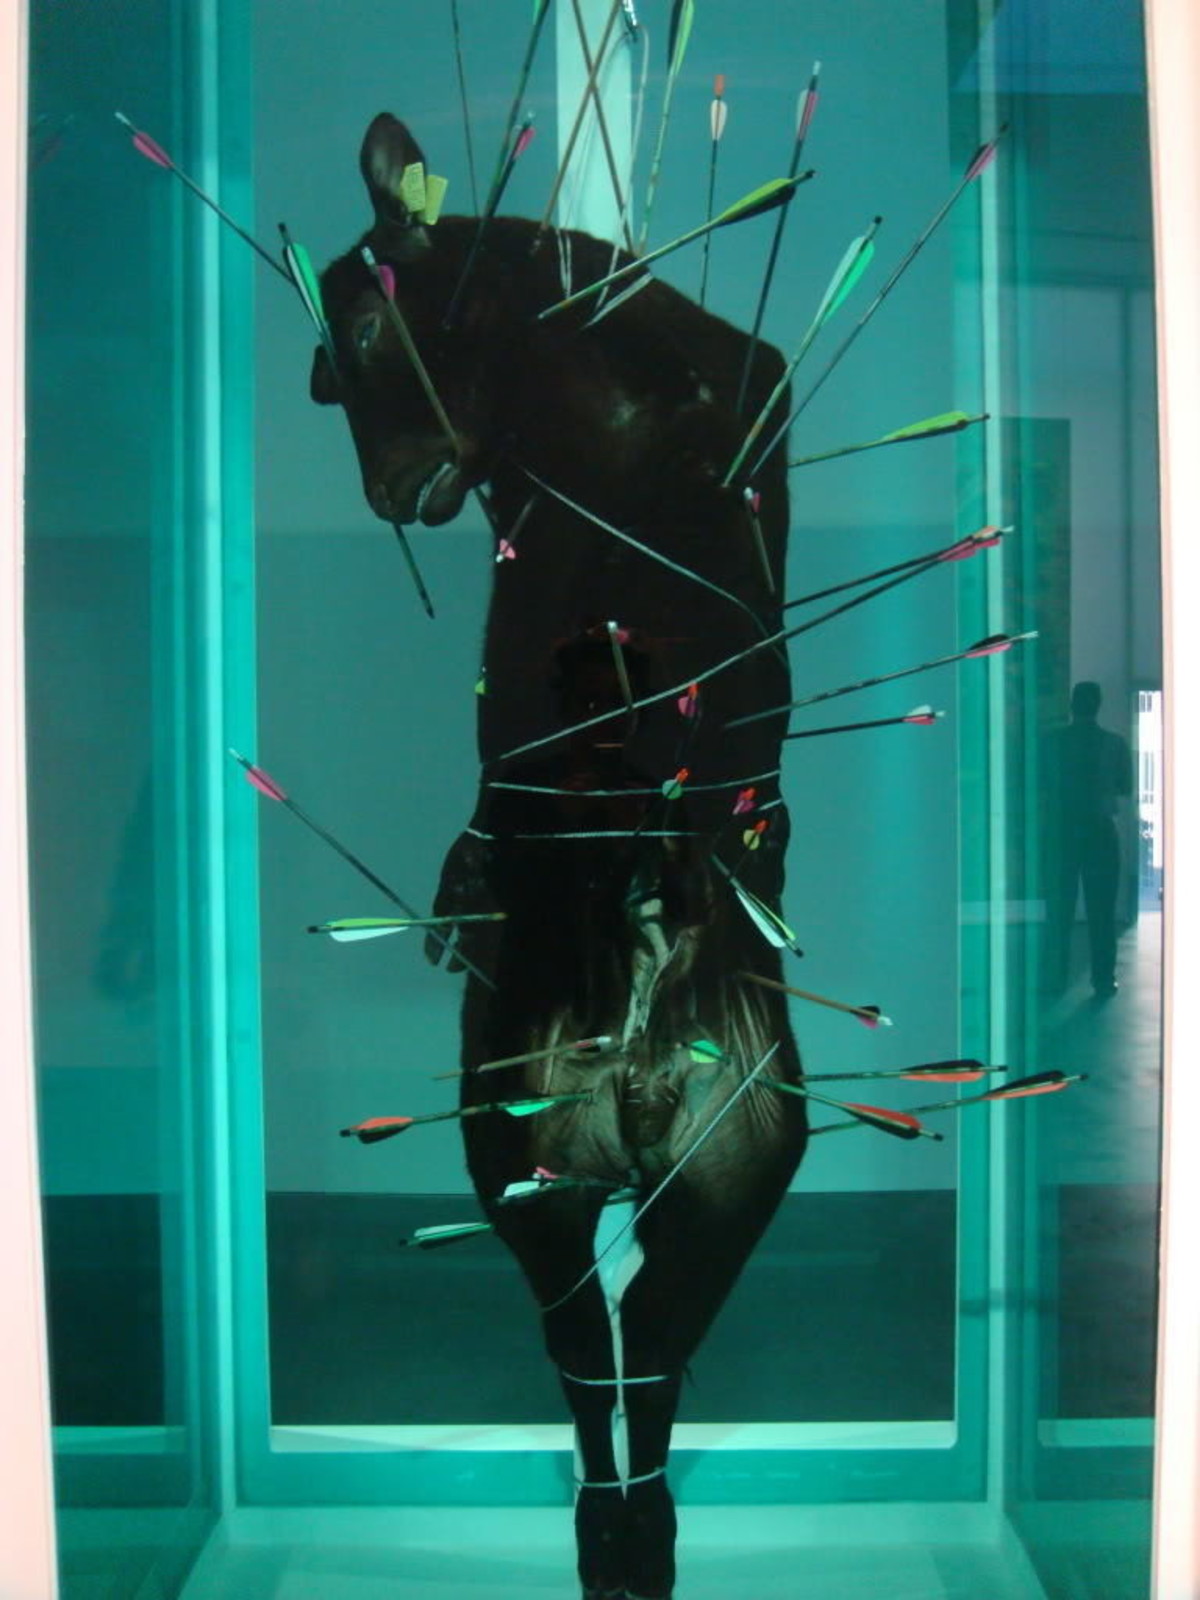 Damien Hirst. Saint Sebastian, Exquisite Pain. 2007. Glass, painted stainless steel, silicone, arrows, crossbow bolts, stainless steel cable and clamps, stainless steel carabiner, bullock and formaldehyde solution. 126.6 x 61.3 x 61.3 cm. The Goss-Michael Foundation, Dallas